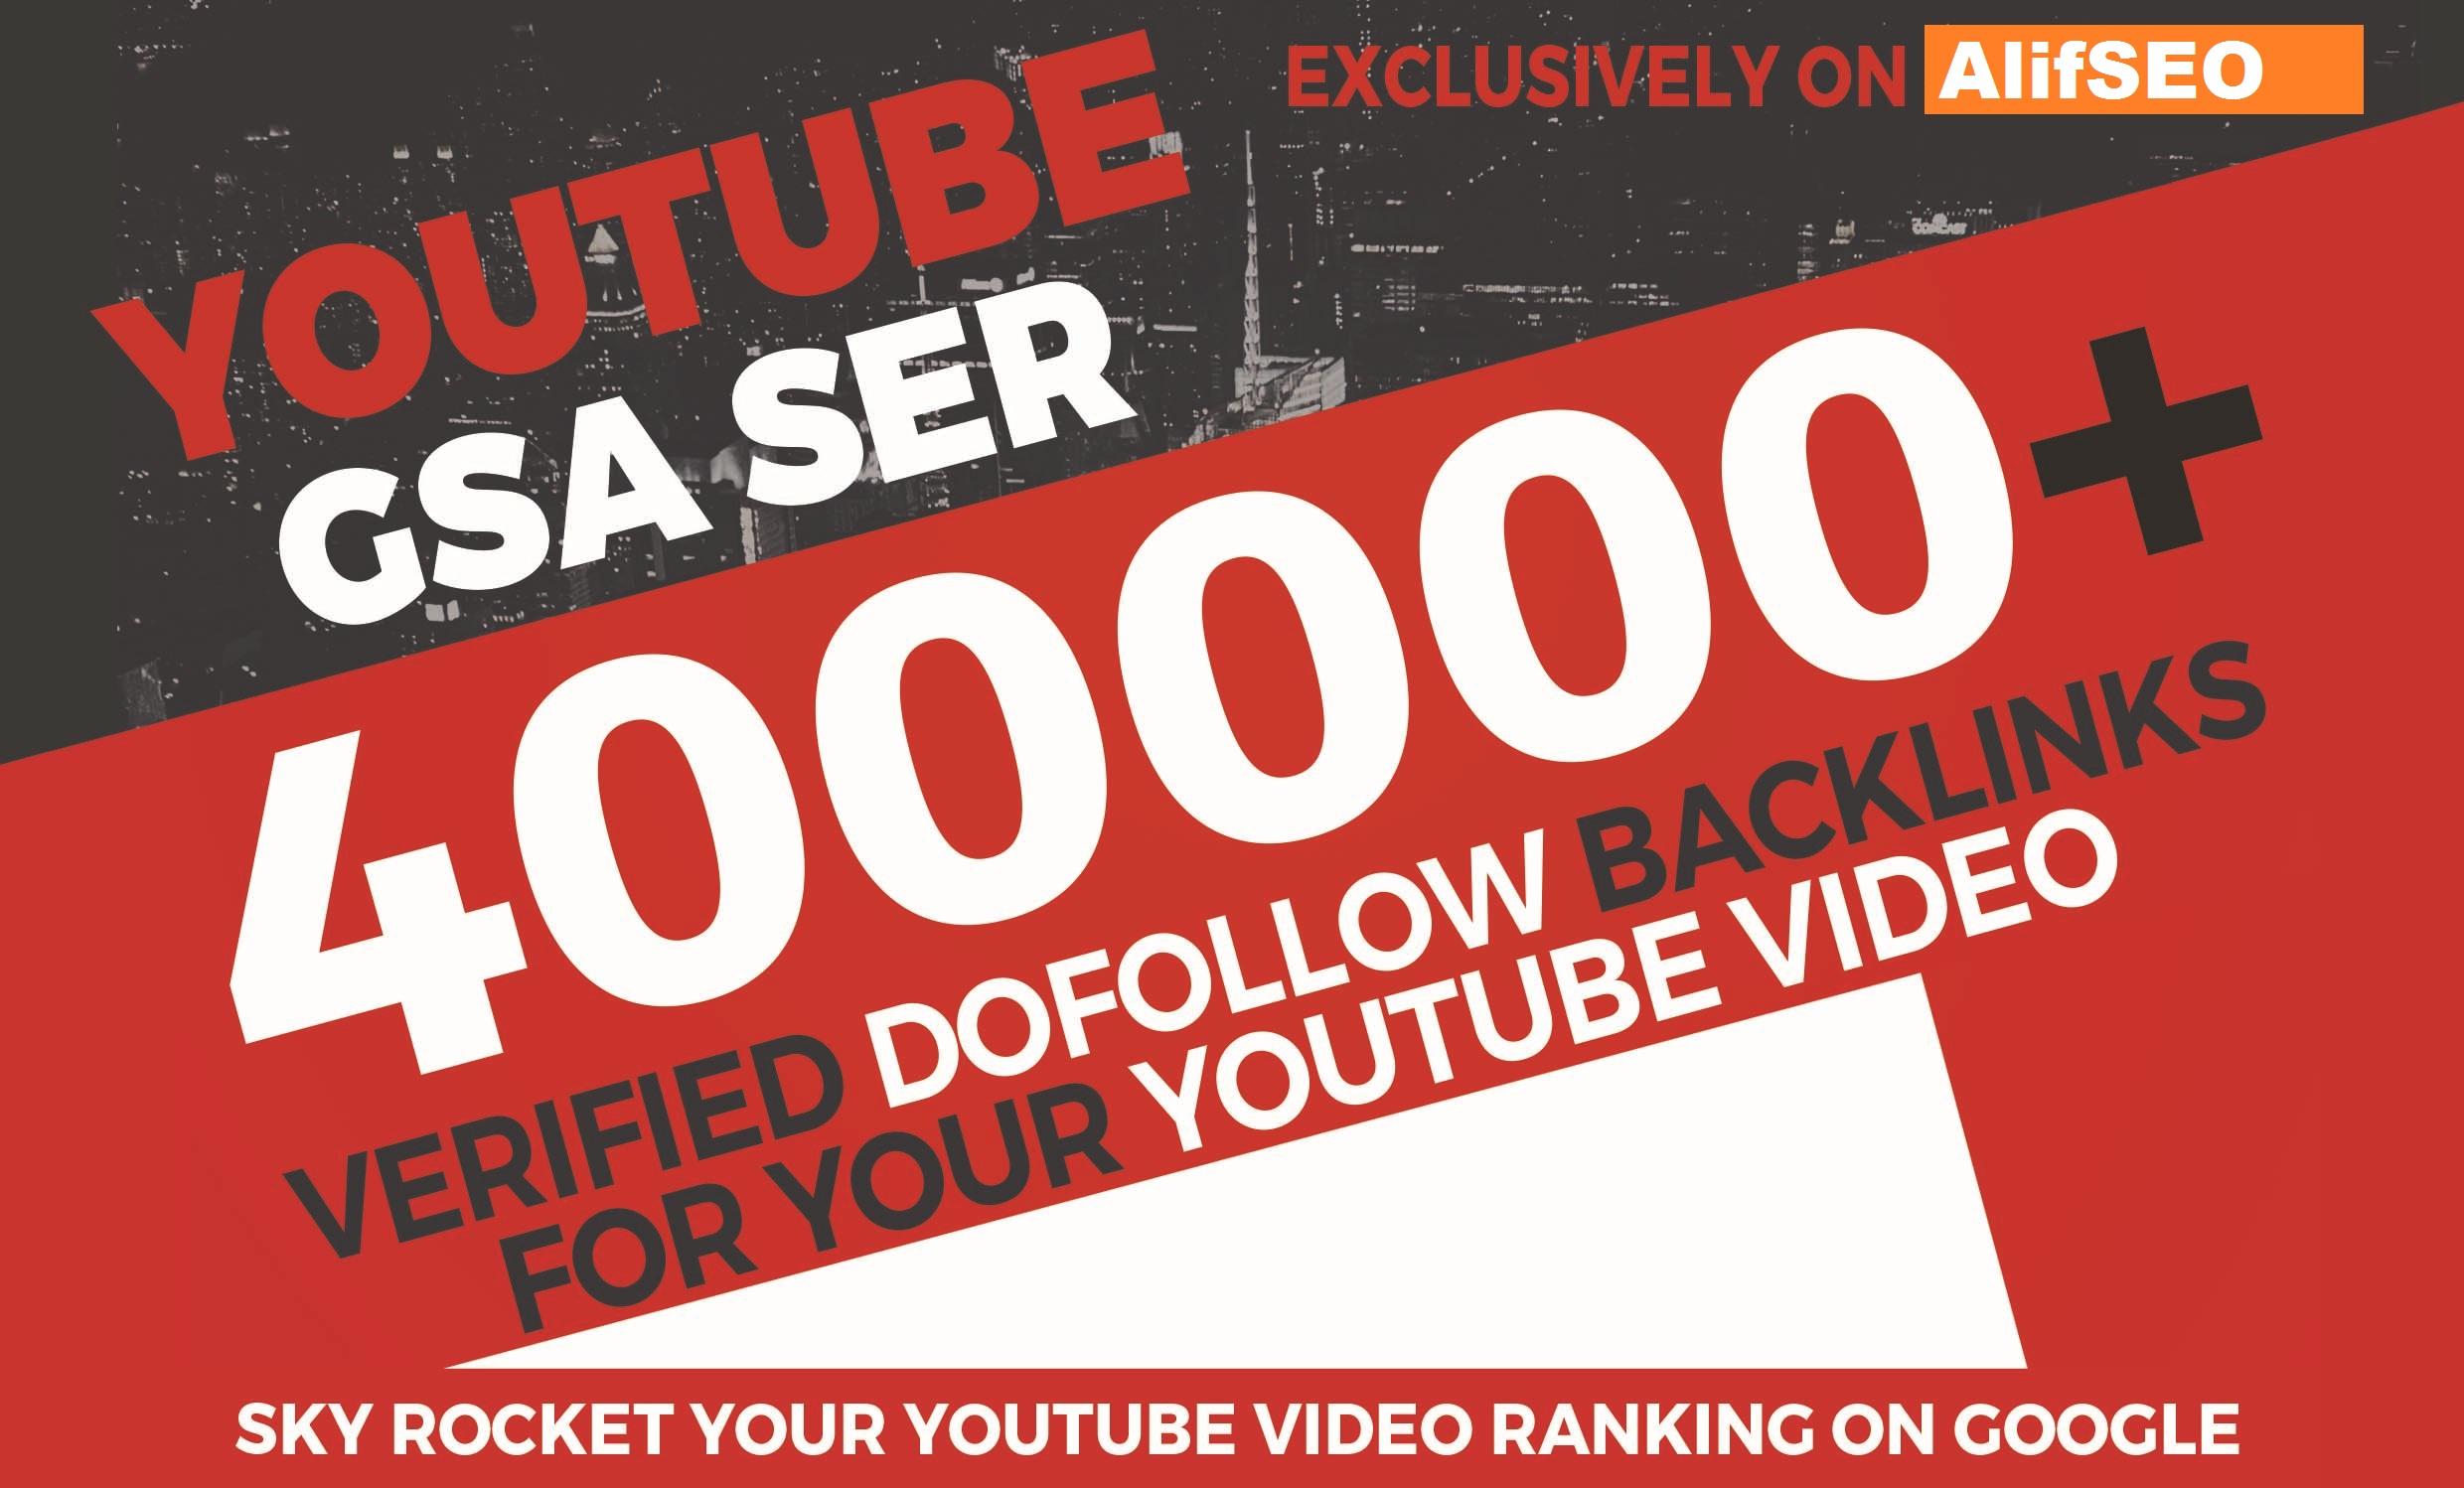 200,000 YouTube GSA SER Verified Backlinks to rank your video in Google